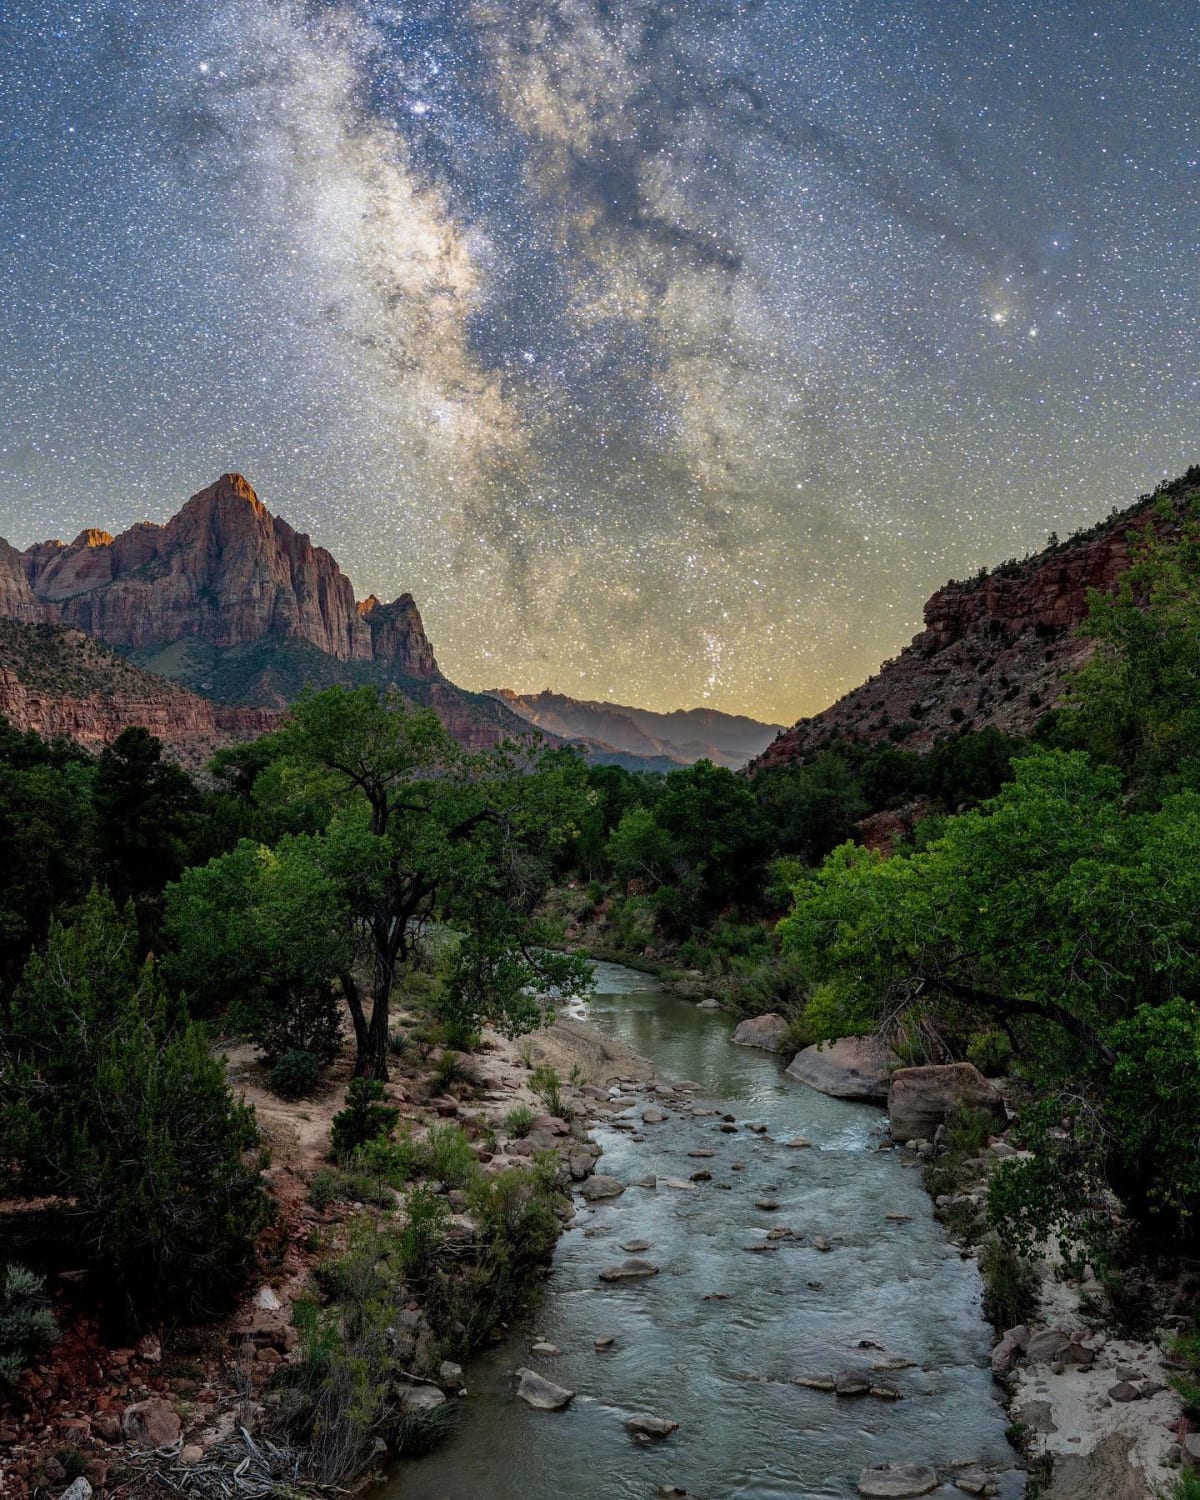 Milky Way core rising over The Watchman in Zion National Park